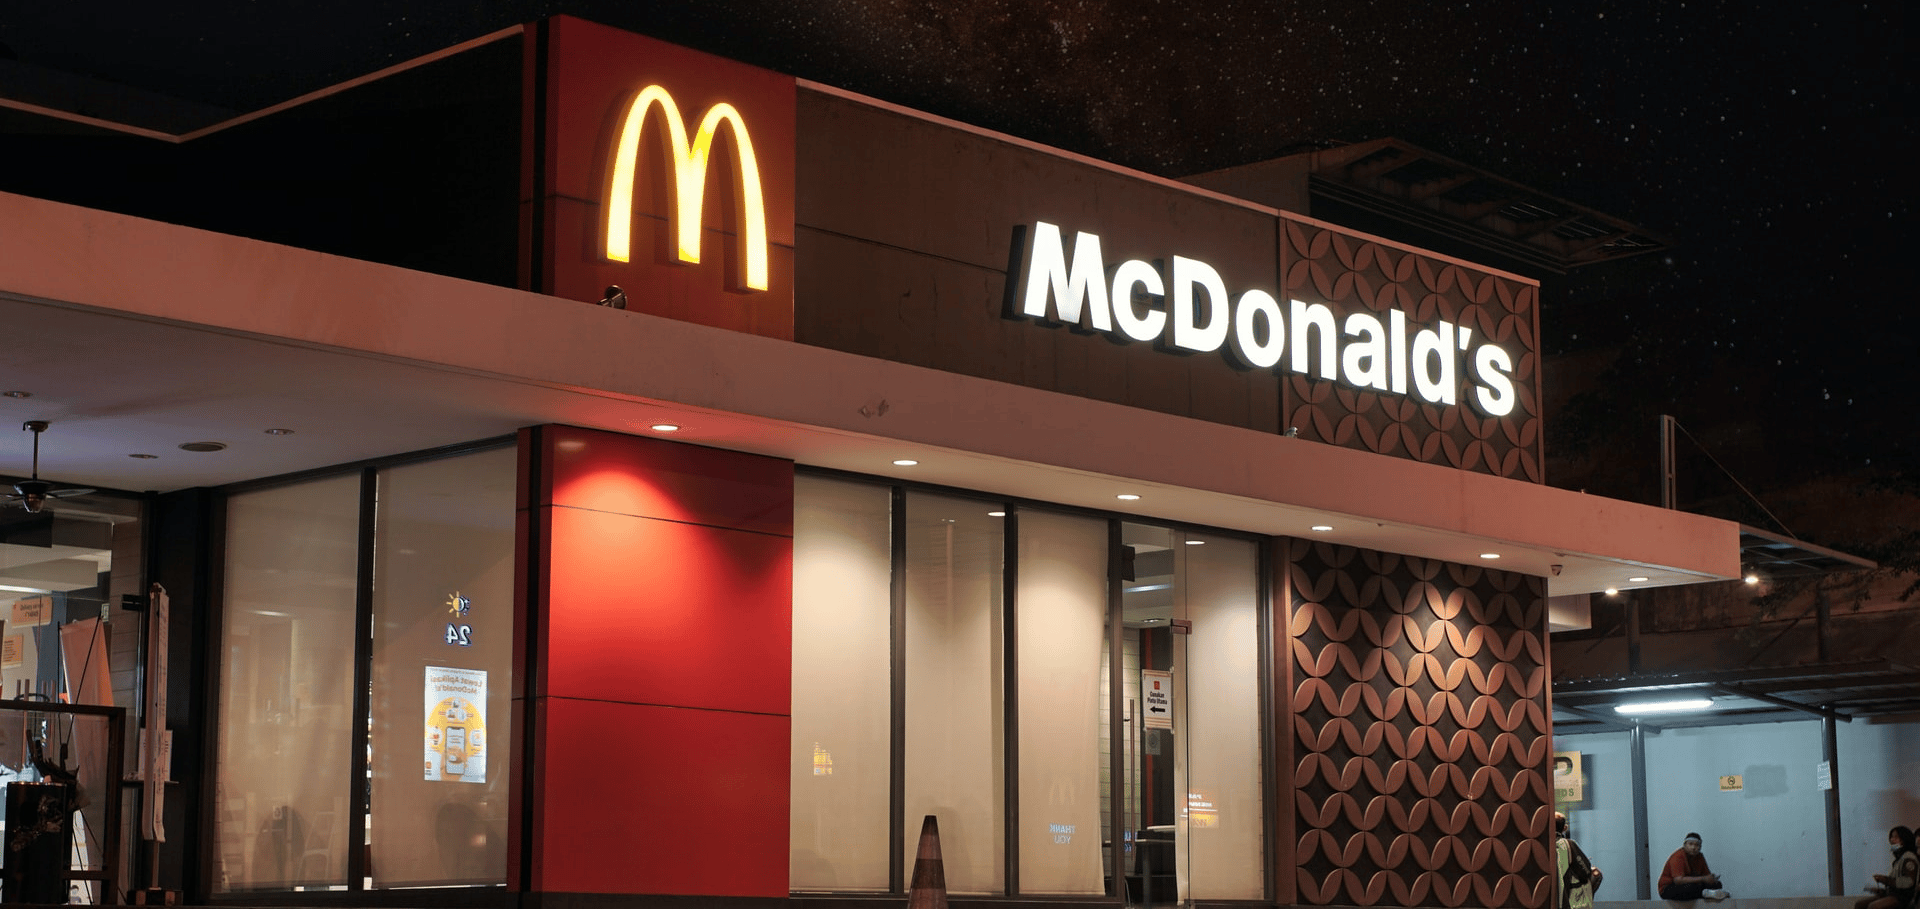 The most notable chain to introduce a QSR loyalty program in the past year is McDonald’s.